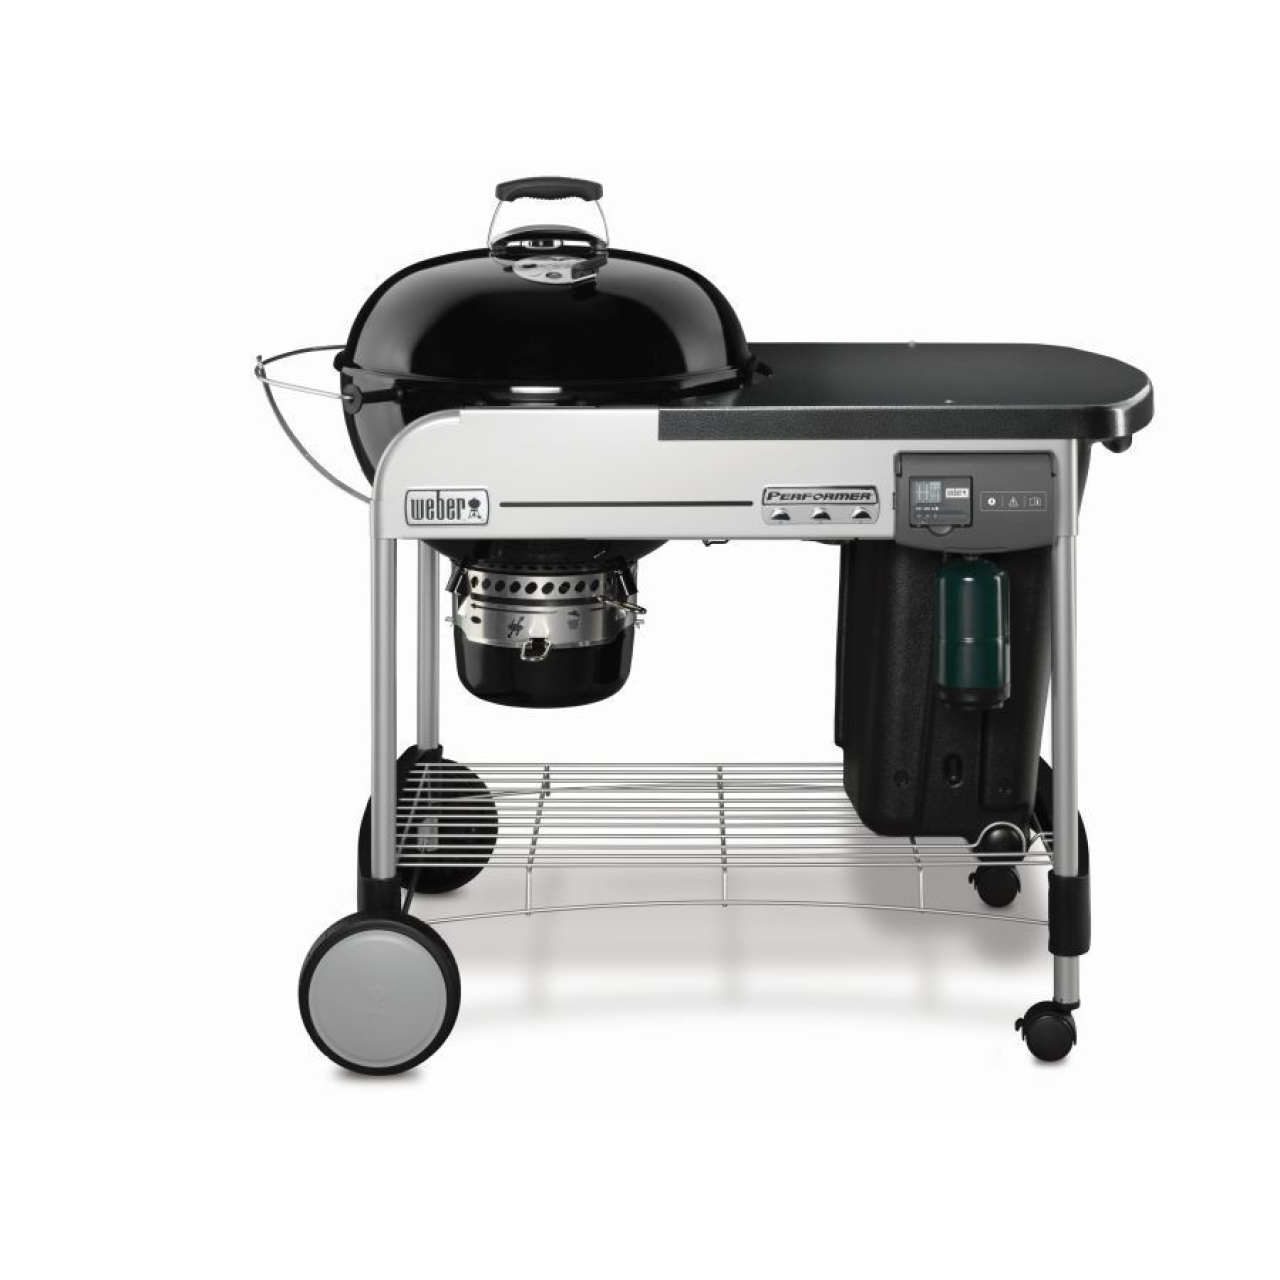 Holzkohlegrill Performer Deluxe GBS